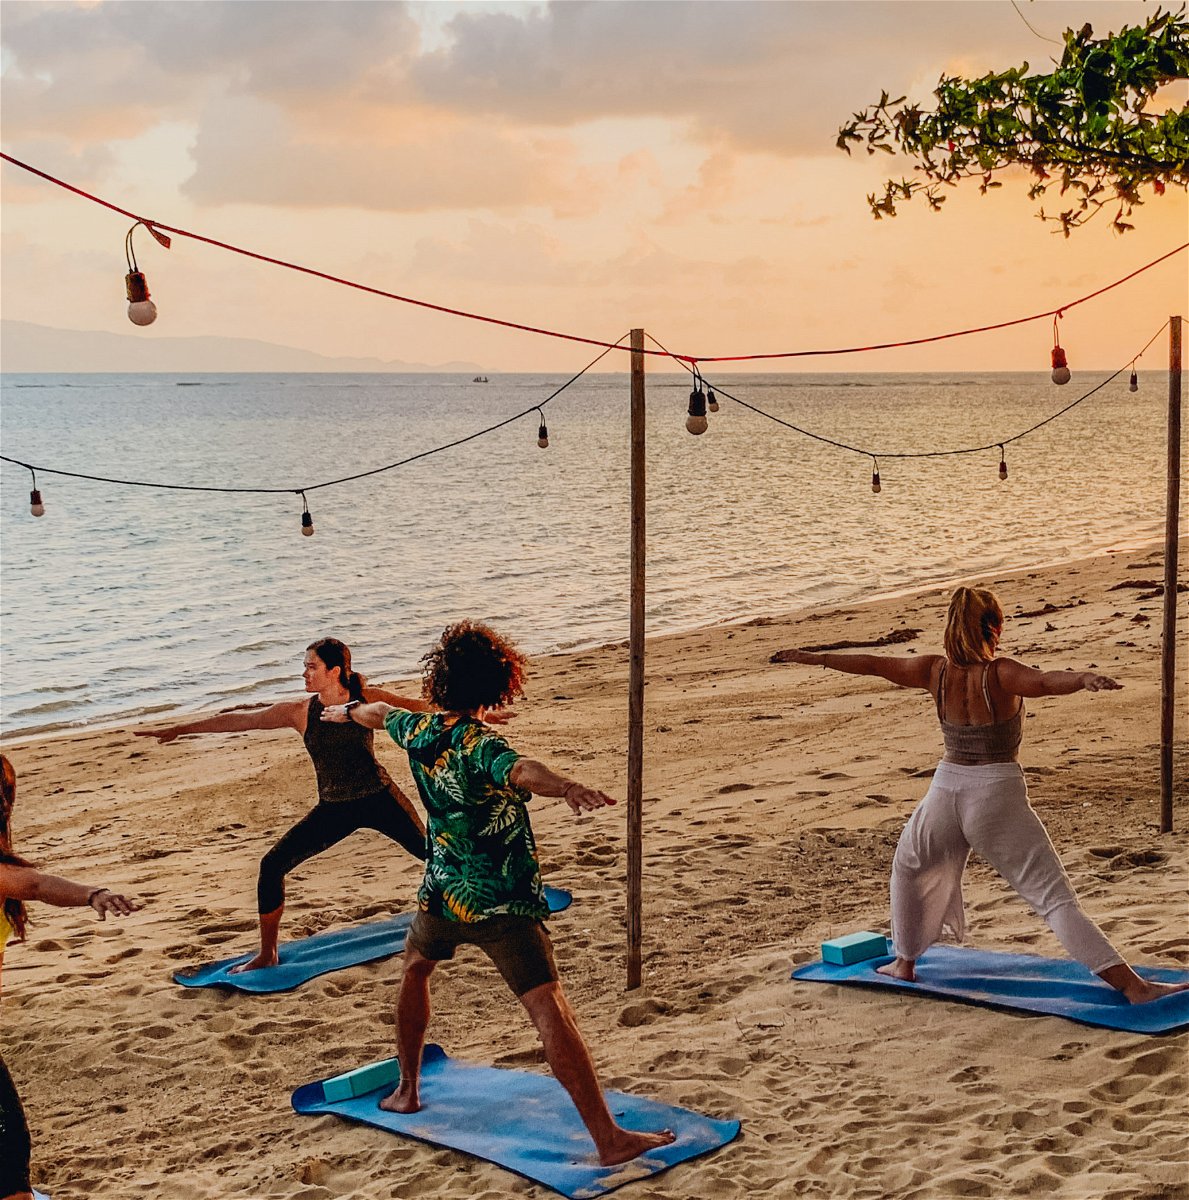 Yoga on the beach at sunset with lights handing above